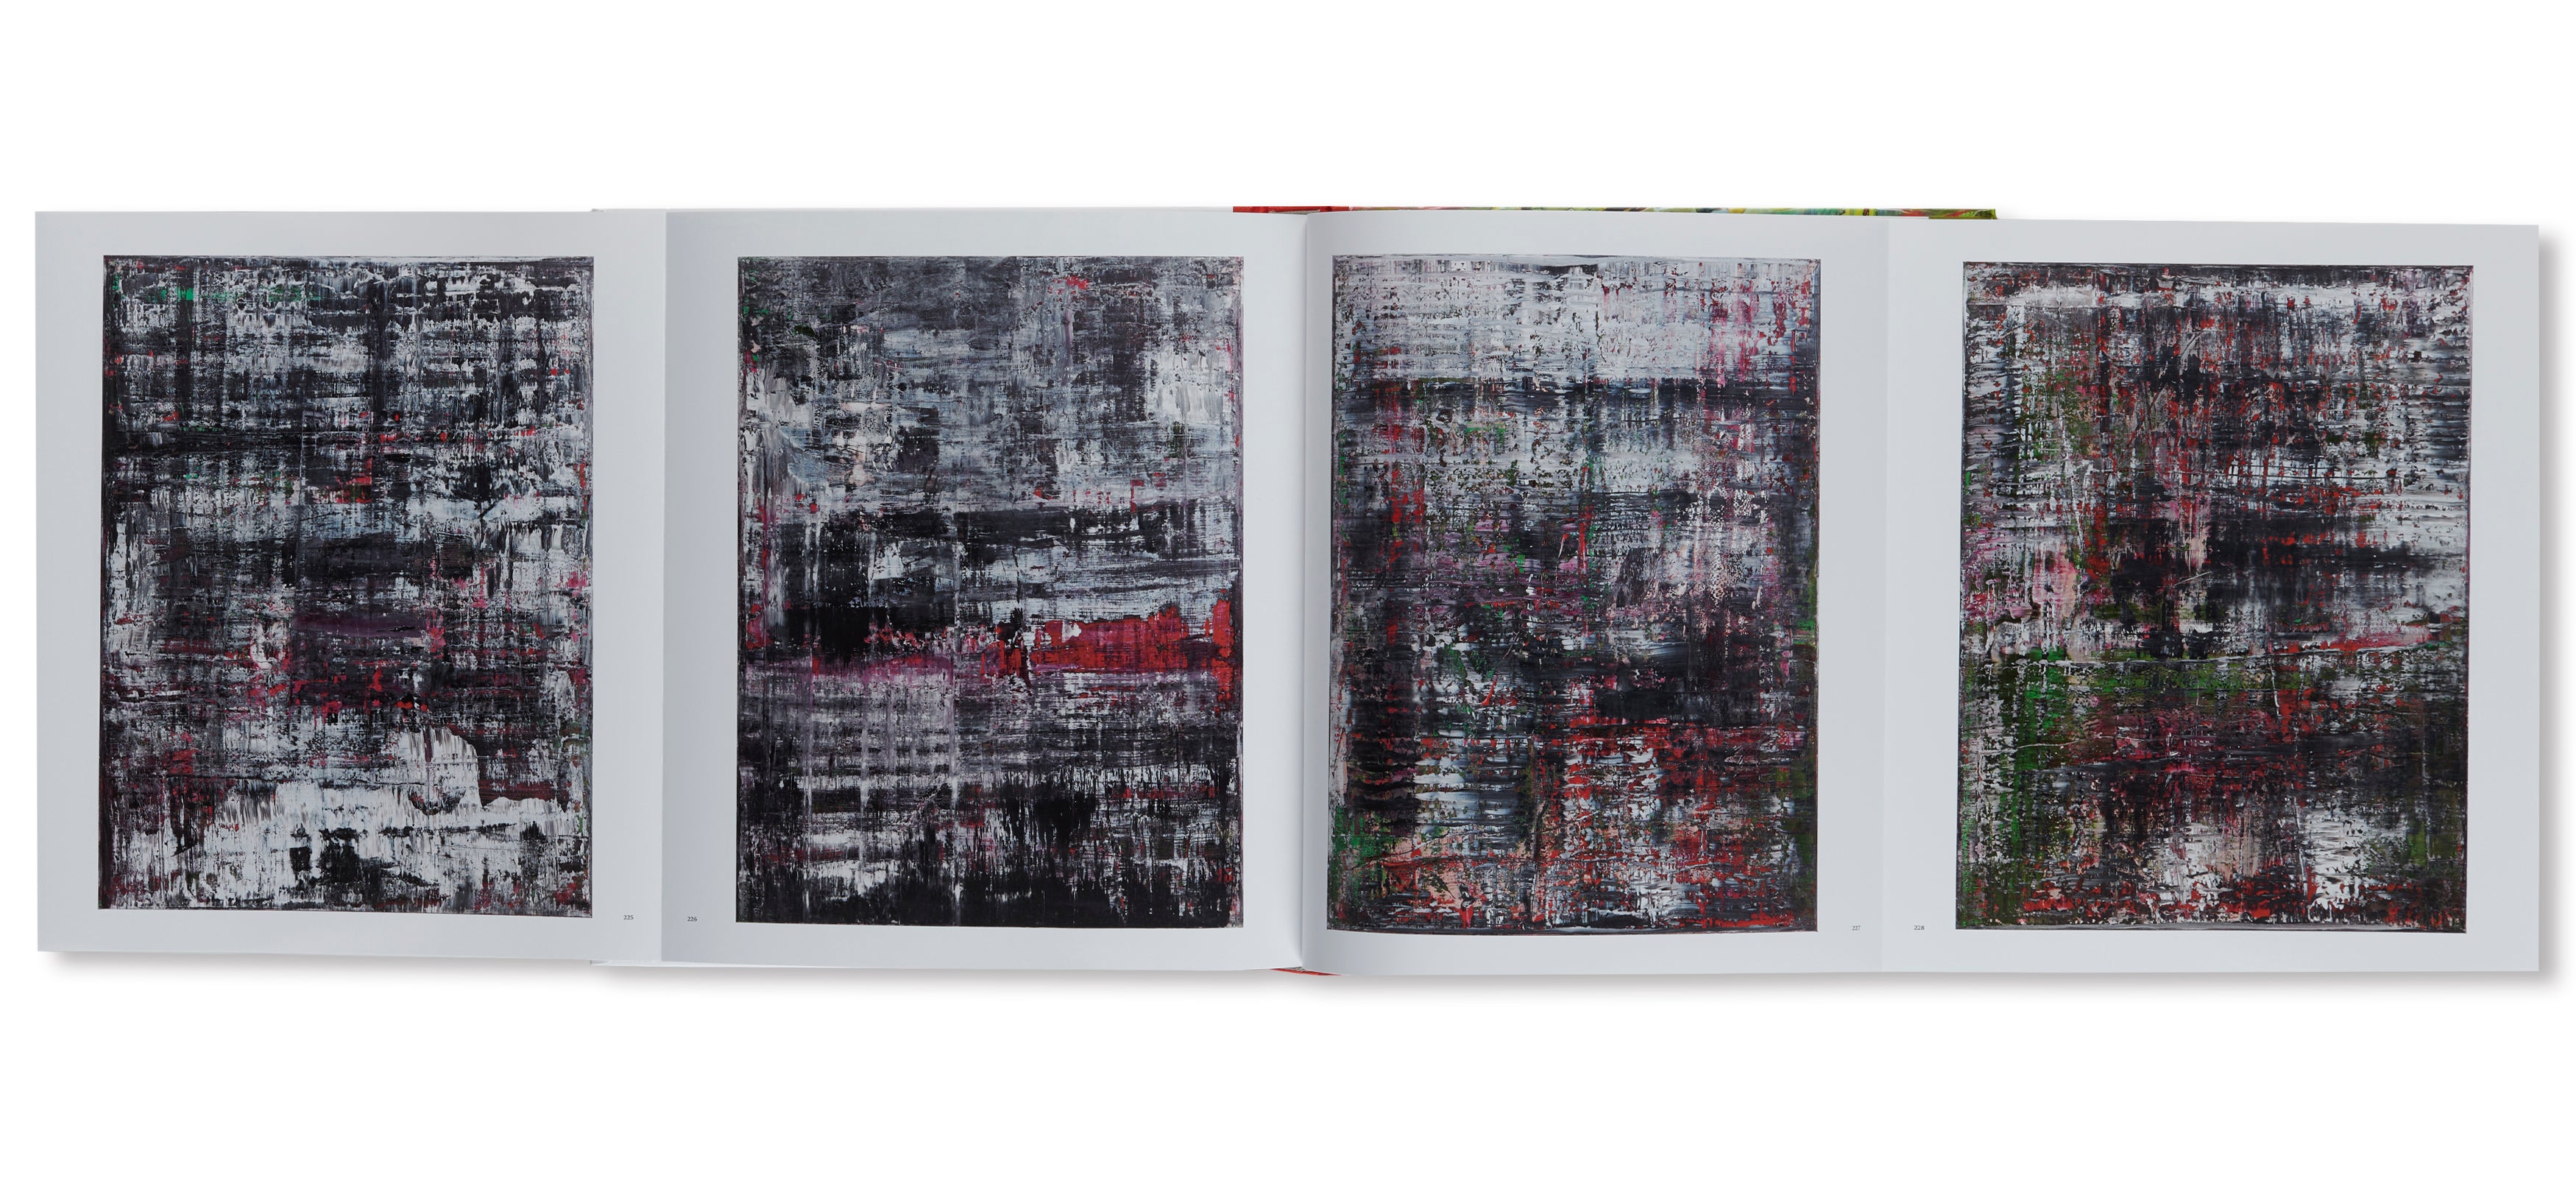 PAINTING AFTER ALL by Gerhard Richter – twelvebooks